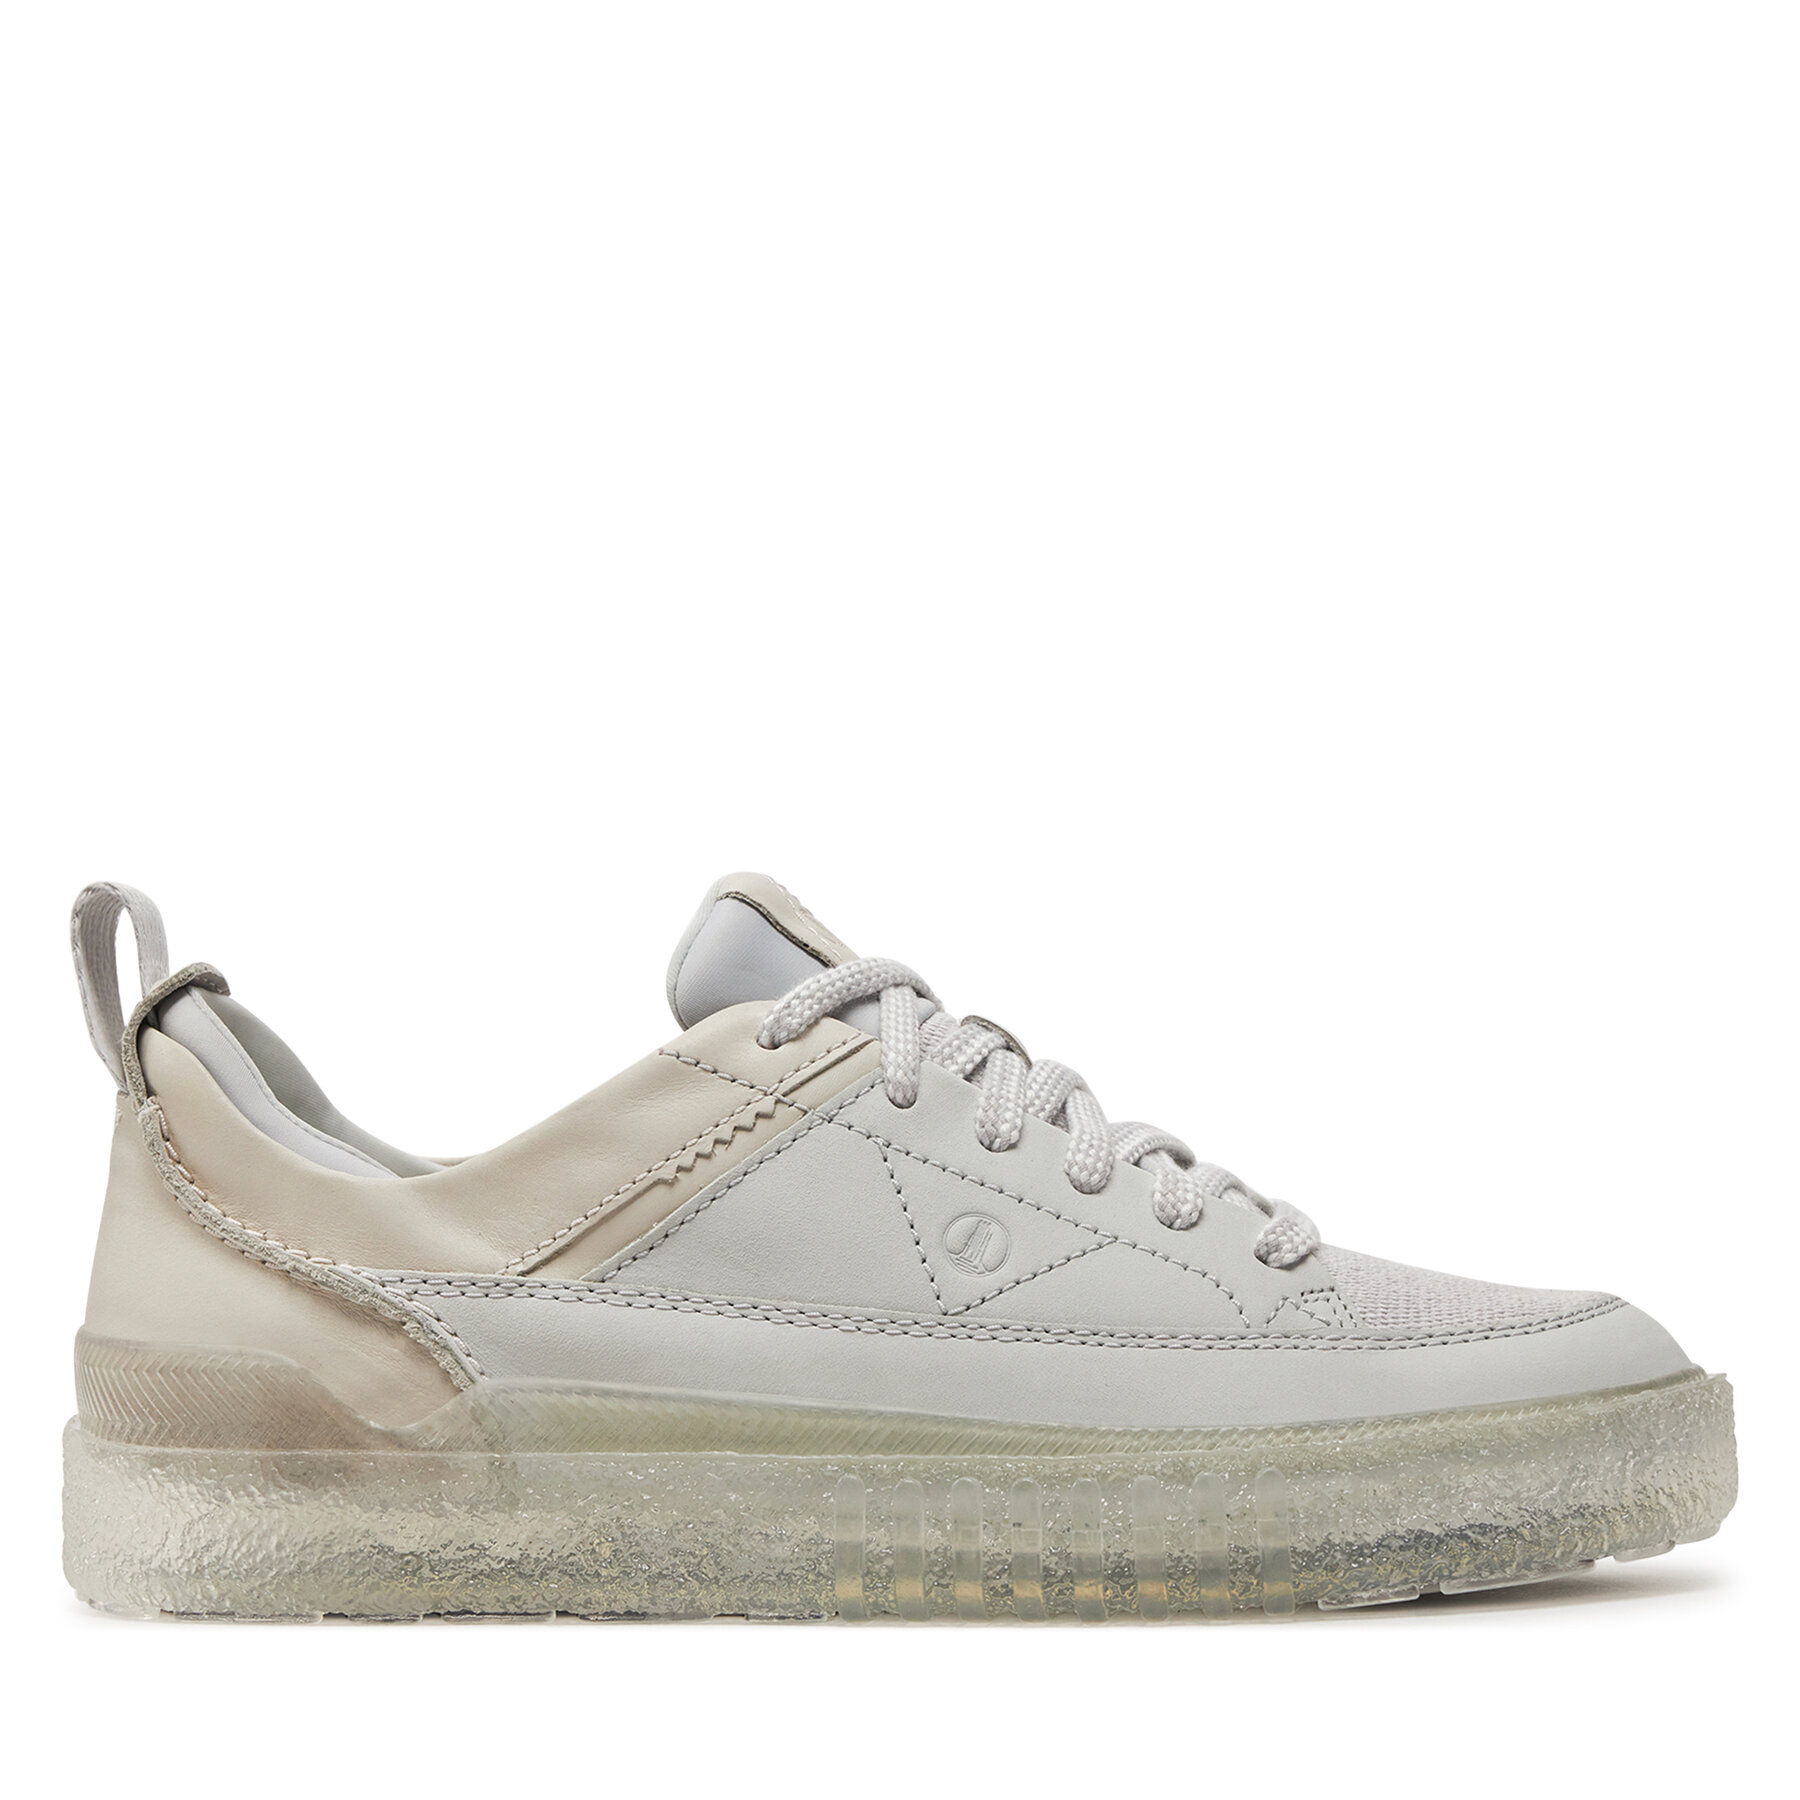 Sneakers Clarks Somerset Lace 26176186 Off White Nbk von Clarks